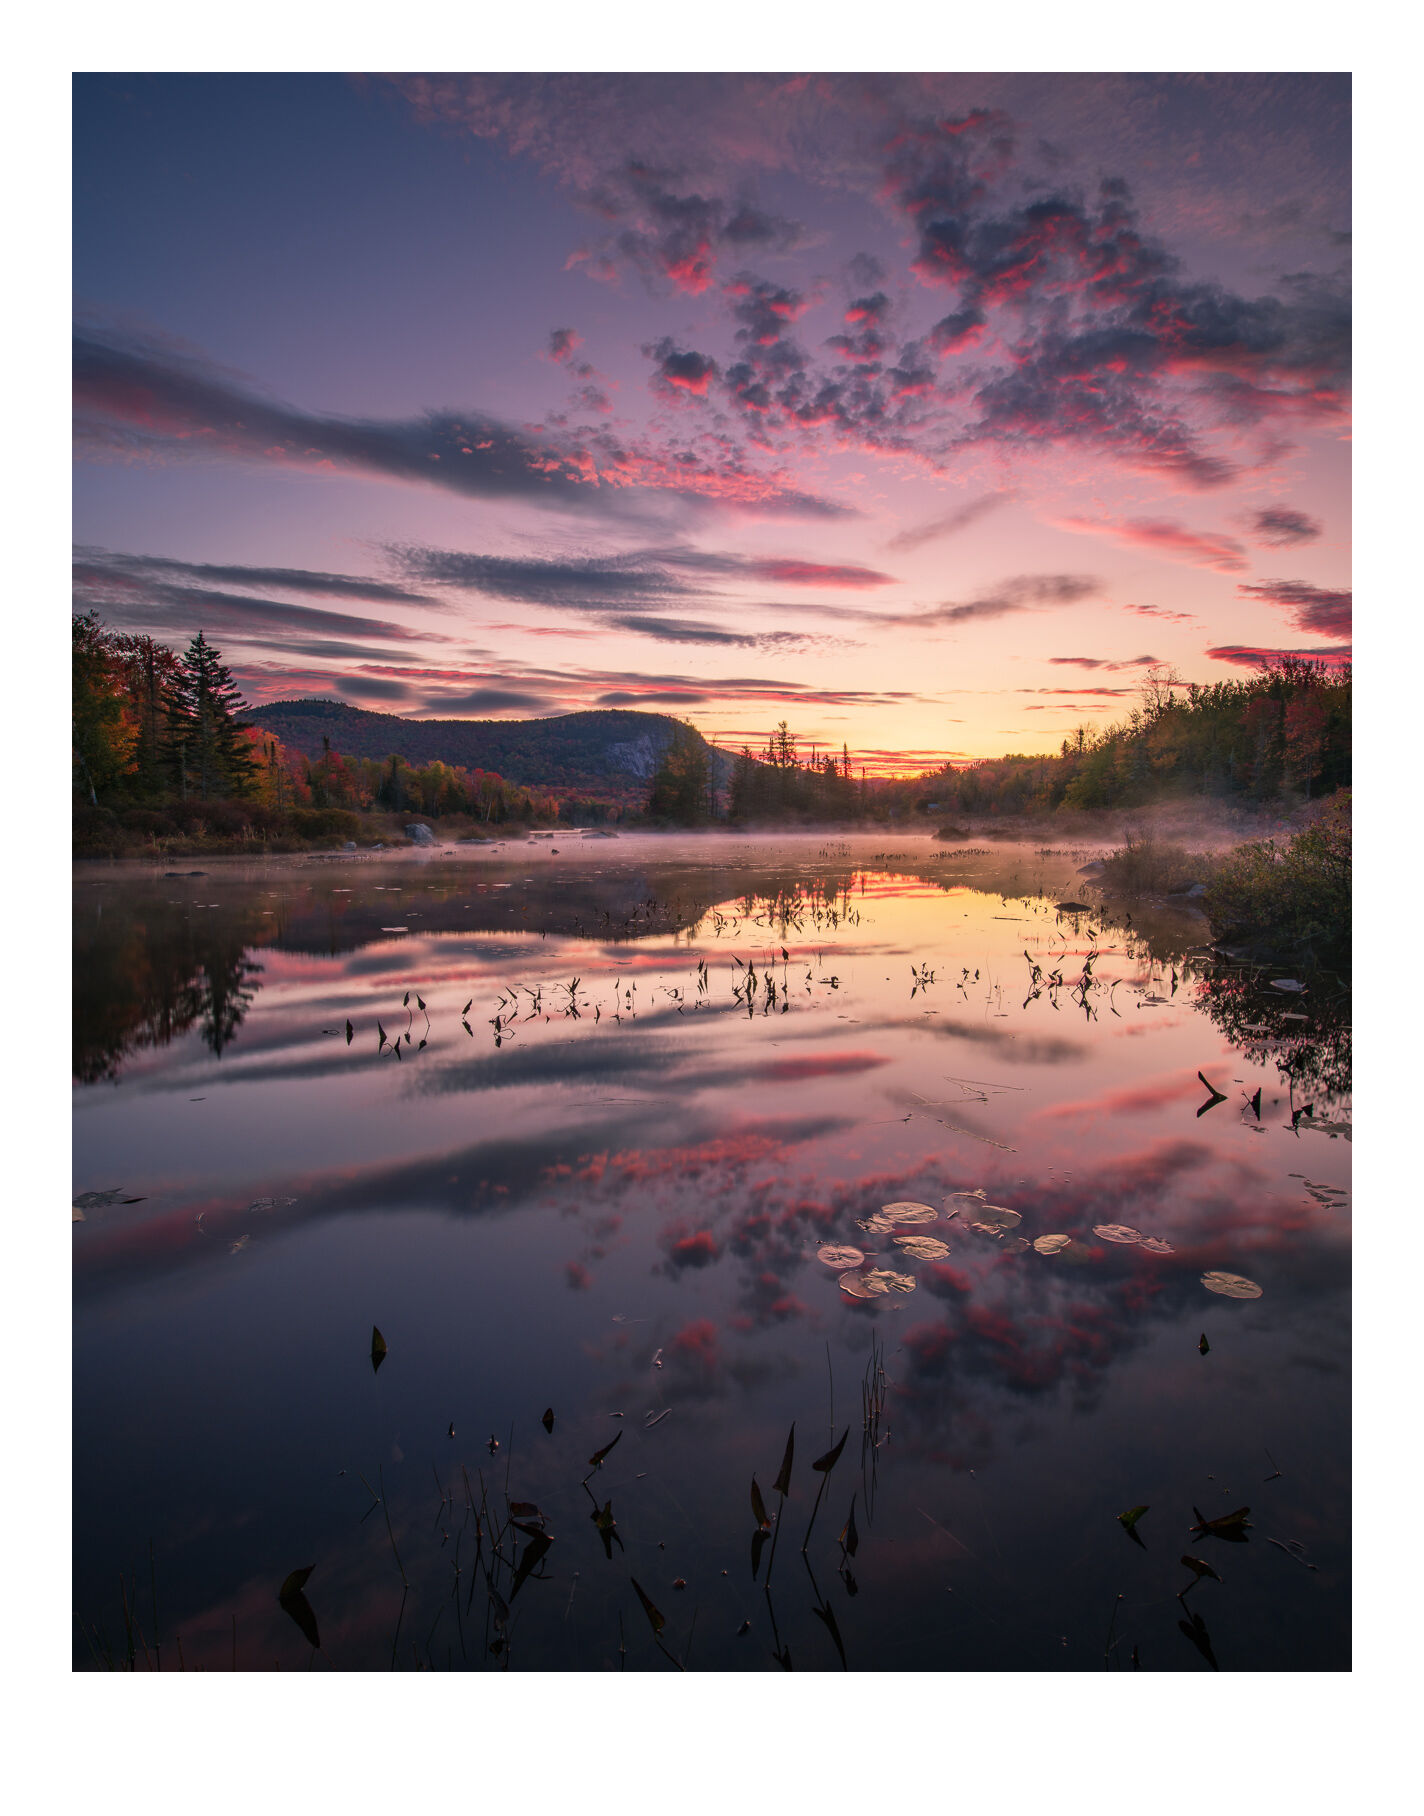 Mirror reflections at dawn on Turtlehead Pond, Vermont.